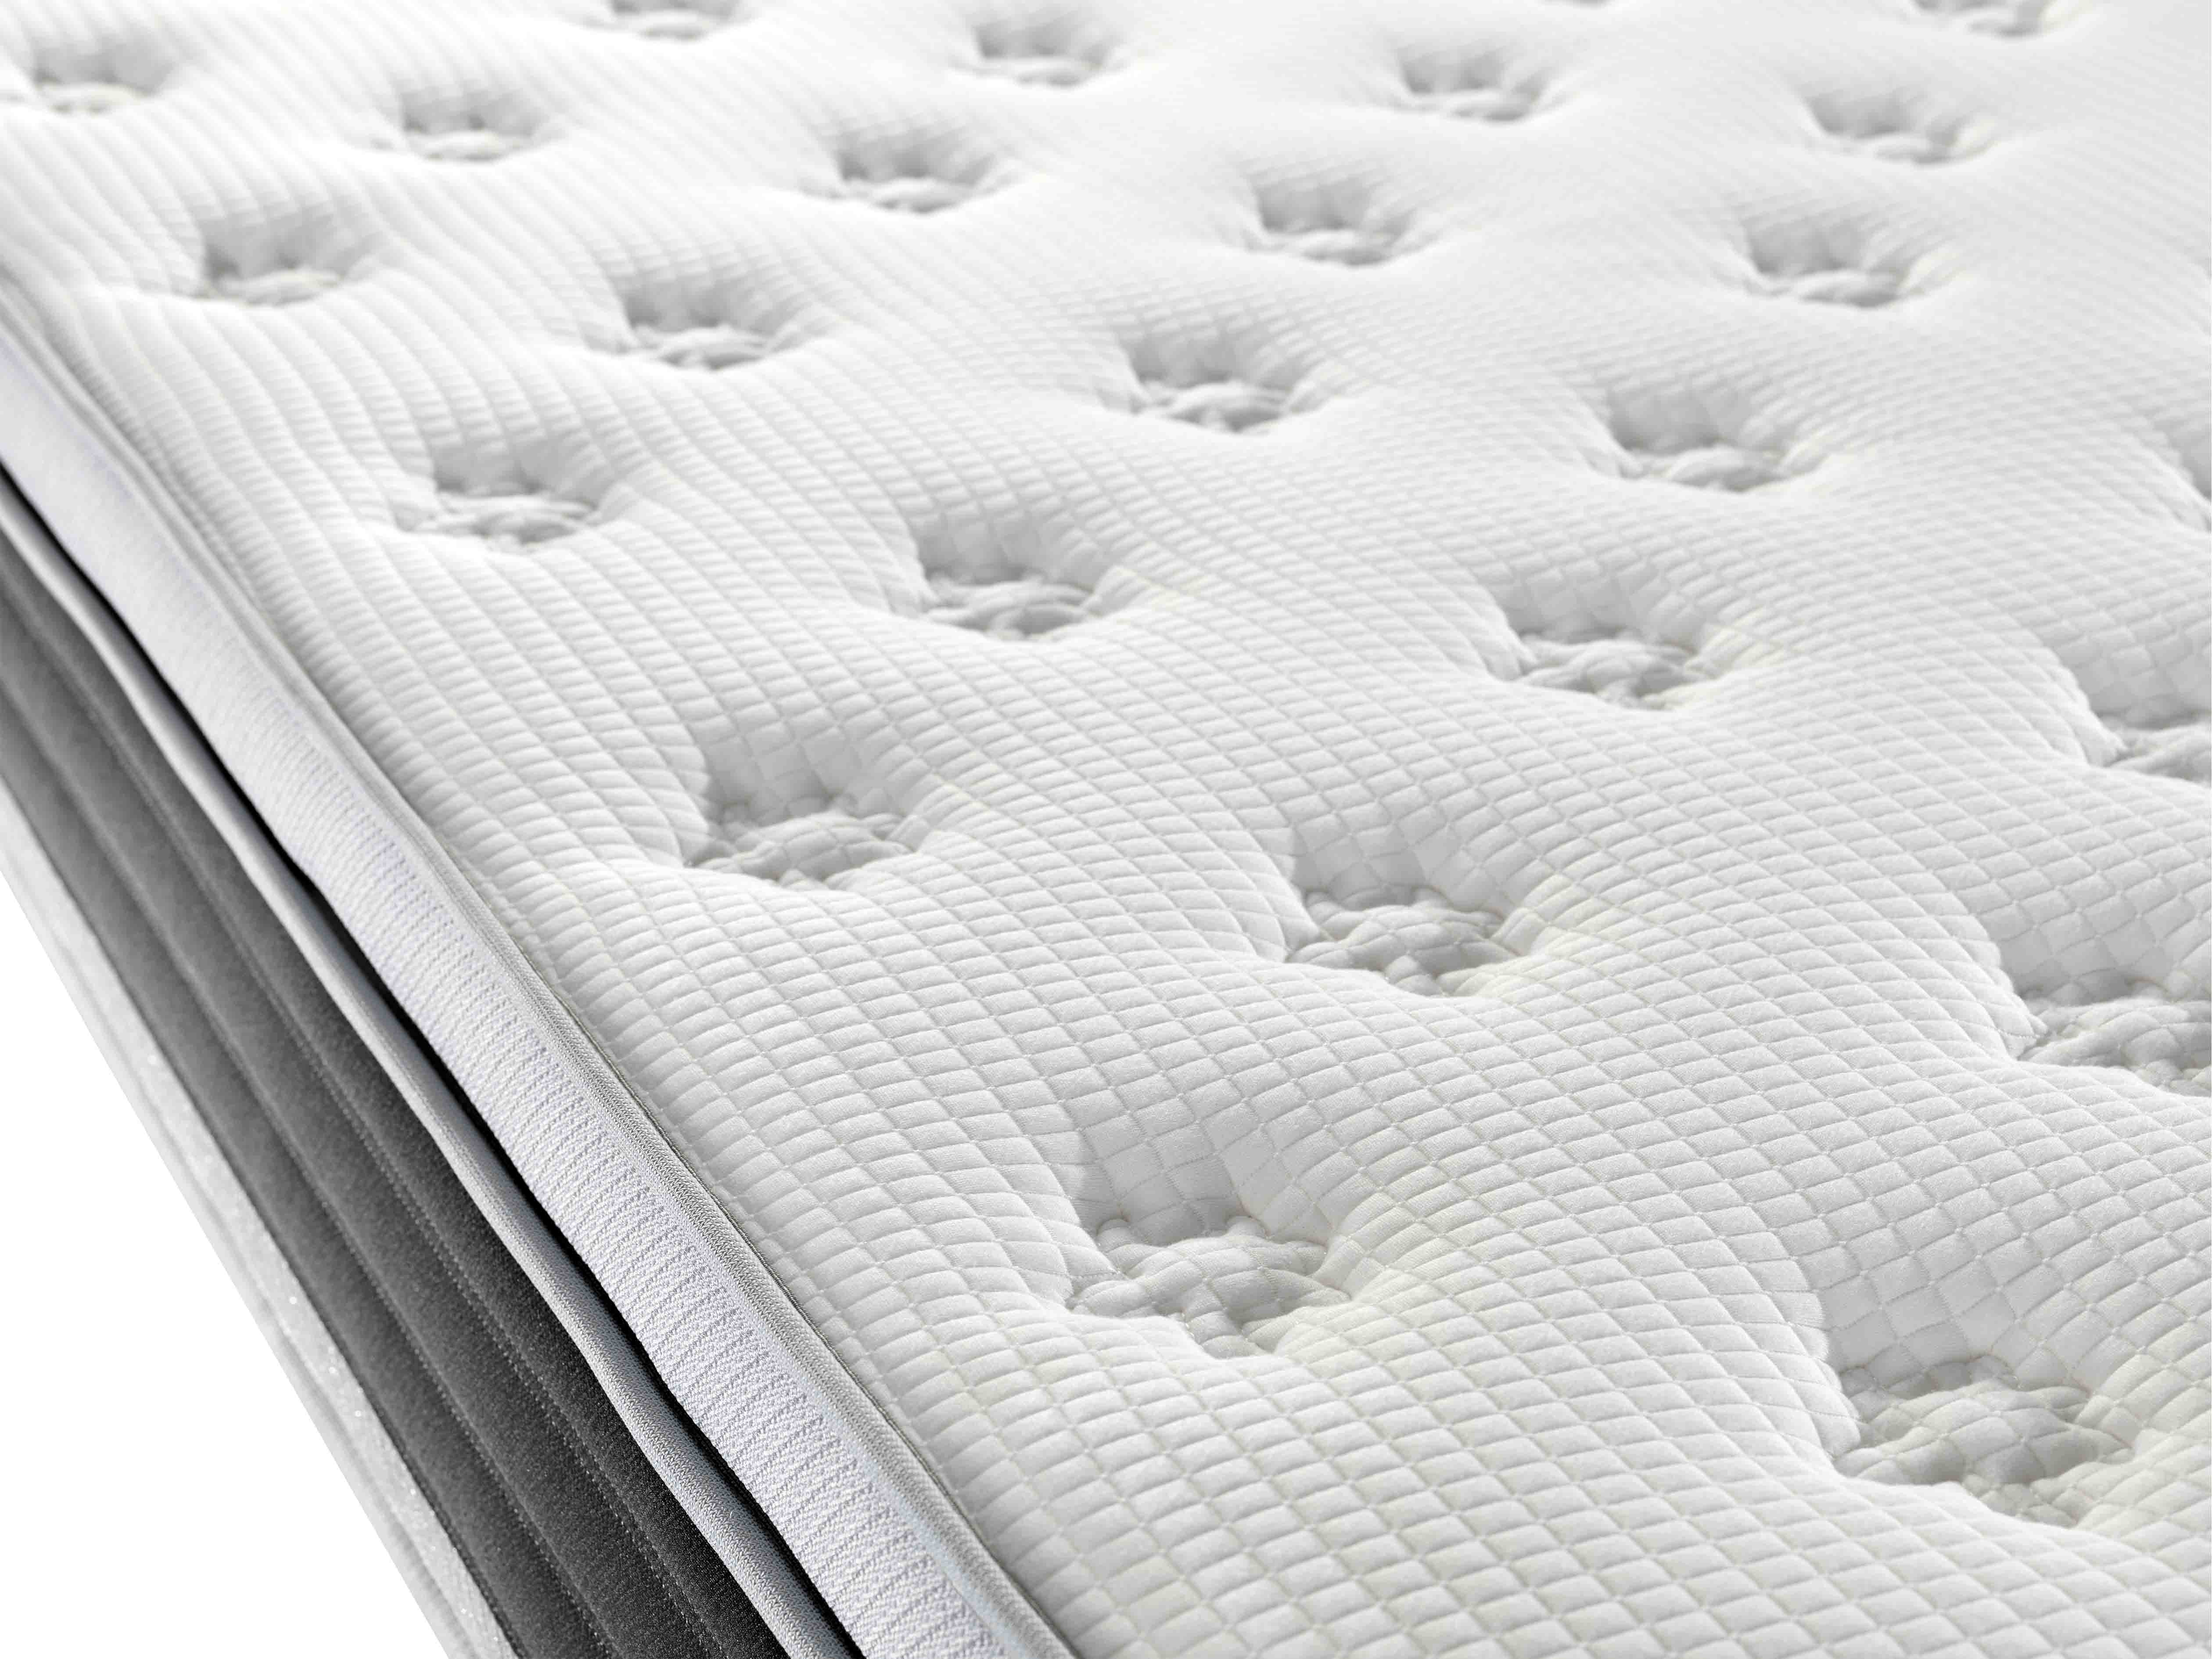 Compressed rolled packed with box pillow top pocket spring mattress